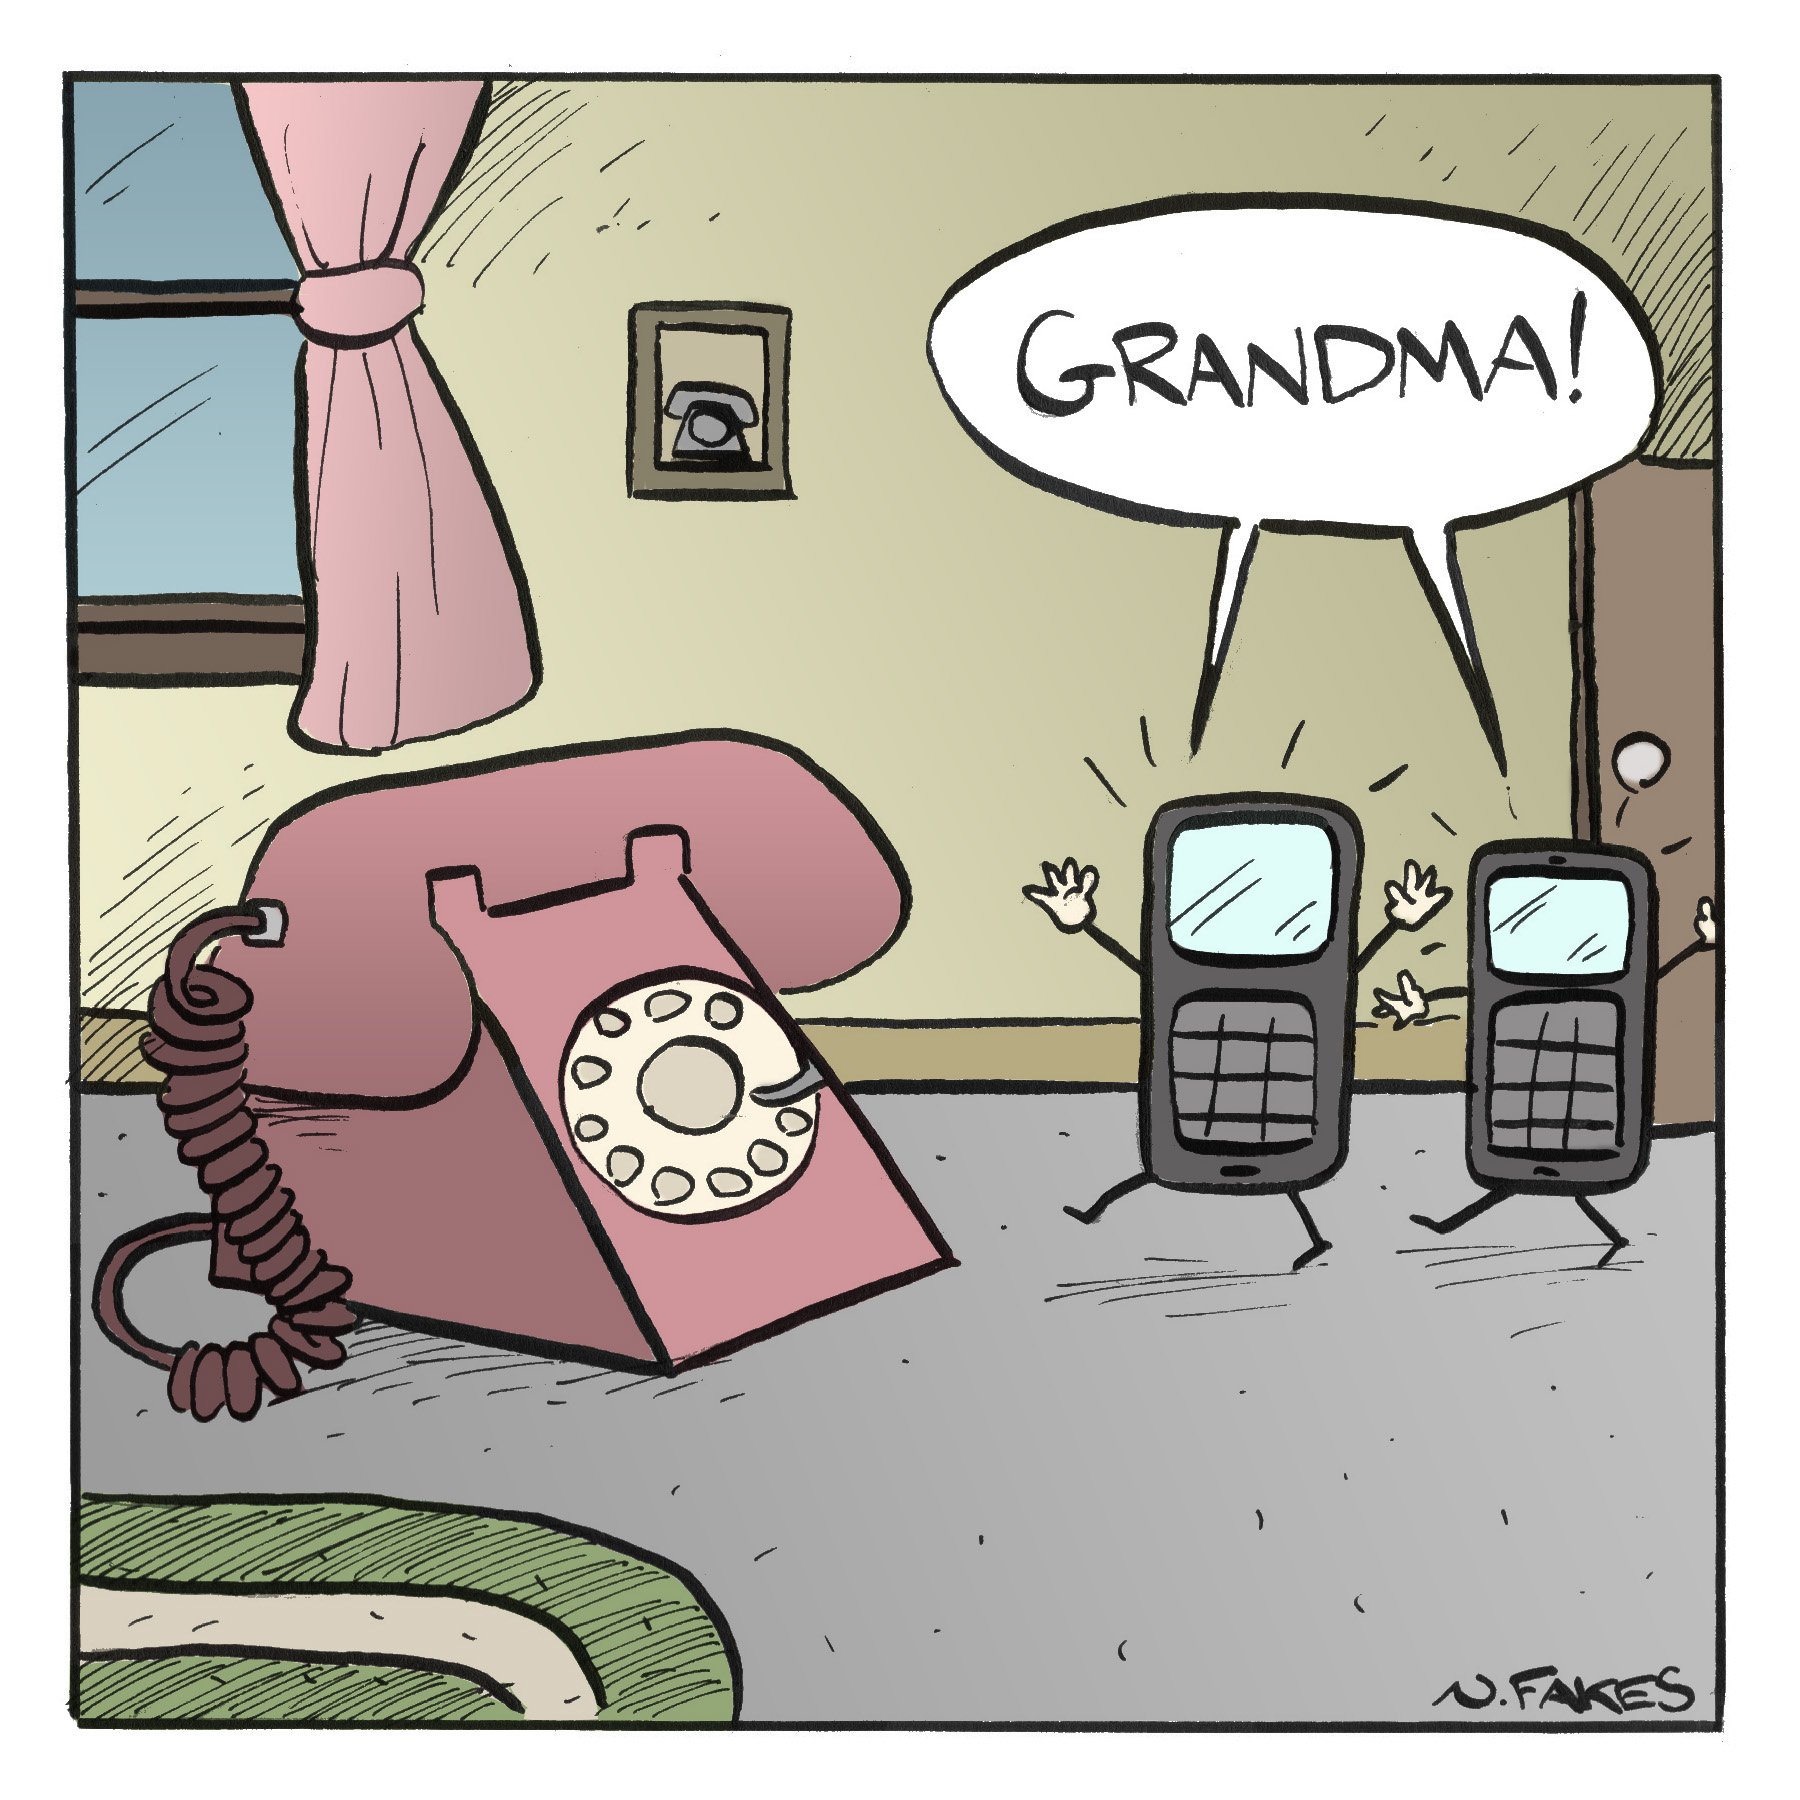 A rotary phone sits in the middle of a living room floor while two nokia cellphones fun into a room with their hands held high while shouting Grandma